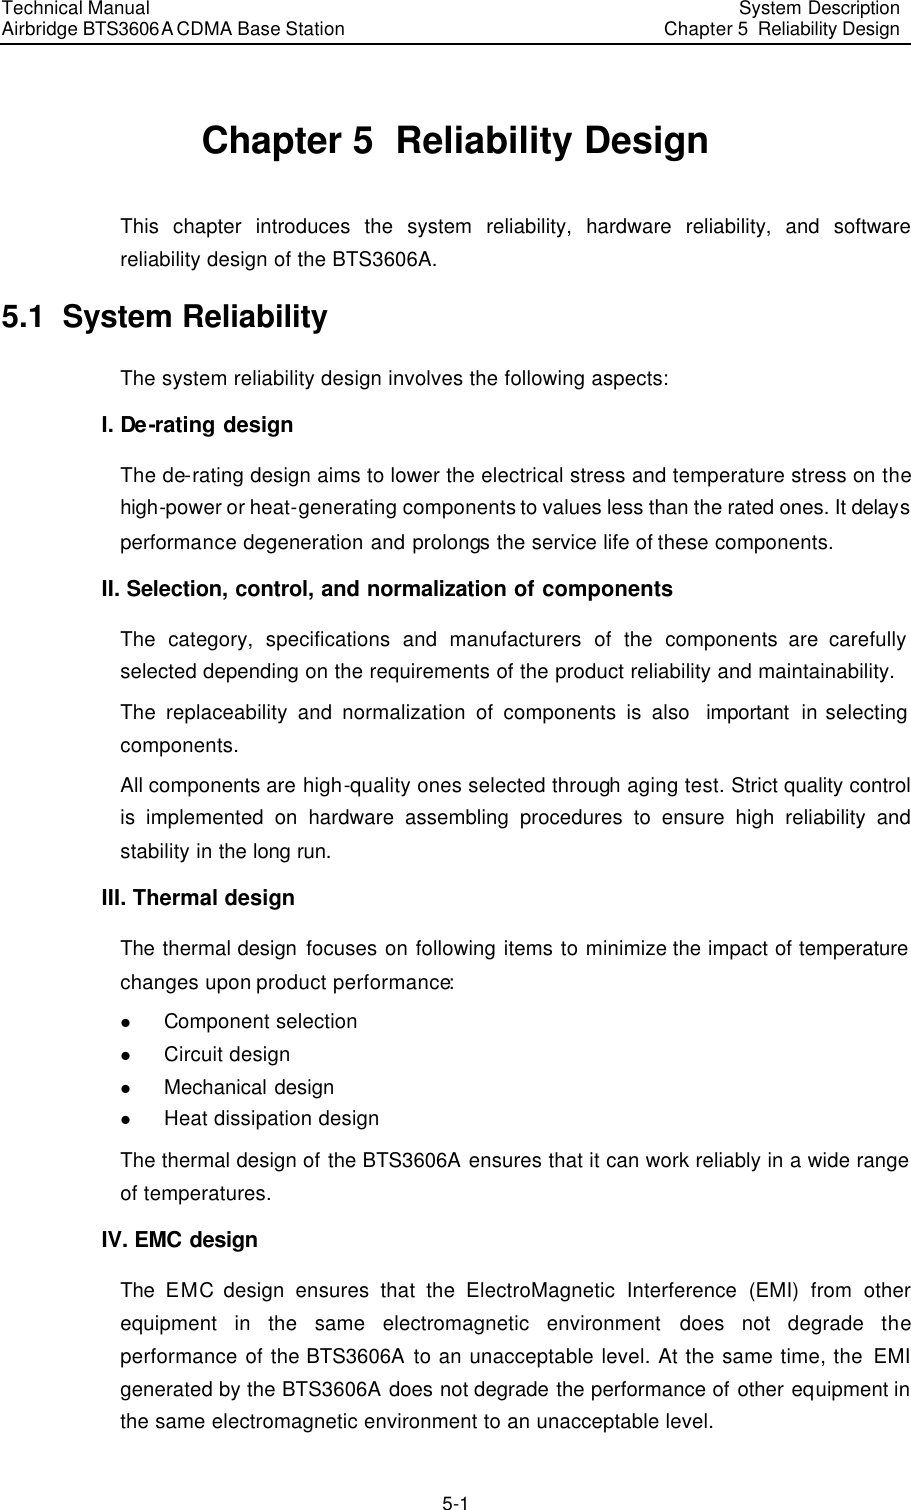 Technical Manual Airbridge BTS3606A CDMA Base Station System Description Chapter 5  Reliability Design  5-1 Chapter 5  Reliability Design This chapter introduces the system reliability, hardware reliability, and software reliability design of the BTS3606A. 5.1  System Reliability The system reliability design involves the following aspects:  I. De-rating design The de-rating design aims to lower the electrical stress and temperature stress on the high-power or heat-generating components to values less than the rated ones. It delays performance degeneration and prolongs the service life of these components. II. Selection, control, and normalization of components The category, specifications and manufacturers of the components are carefully selected depending on the requirements of the product reliability and maintainability.  The replaceability and normalization of components is also  important in selecting components.  All components are high-quality ones selected through aging test. Strict quality control is implemented on hardware assembling procedures to ensure high reliability and stability in the long run.  III. Thermal design The thermal design focuses on following items to minimize the impact of temperature changes upon product performance:  l Component selection l Circuit design l Mechanical design l Heat dissipation design The thermal design of the BTS3606A ensures that it can work reliably in a wide range of temperatures. IV. EMC design The EMC design ensures that the ElectroMagnetic Interference (EMI) from other equipment in the same electromagnetic environment does not degrade the performance of the BTS3606A to an unacceptable level. At the same time, the EMI generated by the BTS3606A does not degrade the performance of other equipment in the same electromagnetic environment to an unacceptable level. 